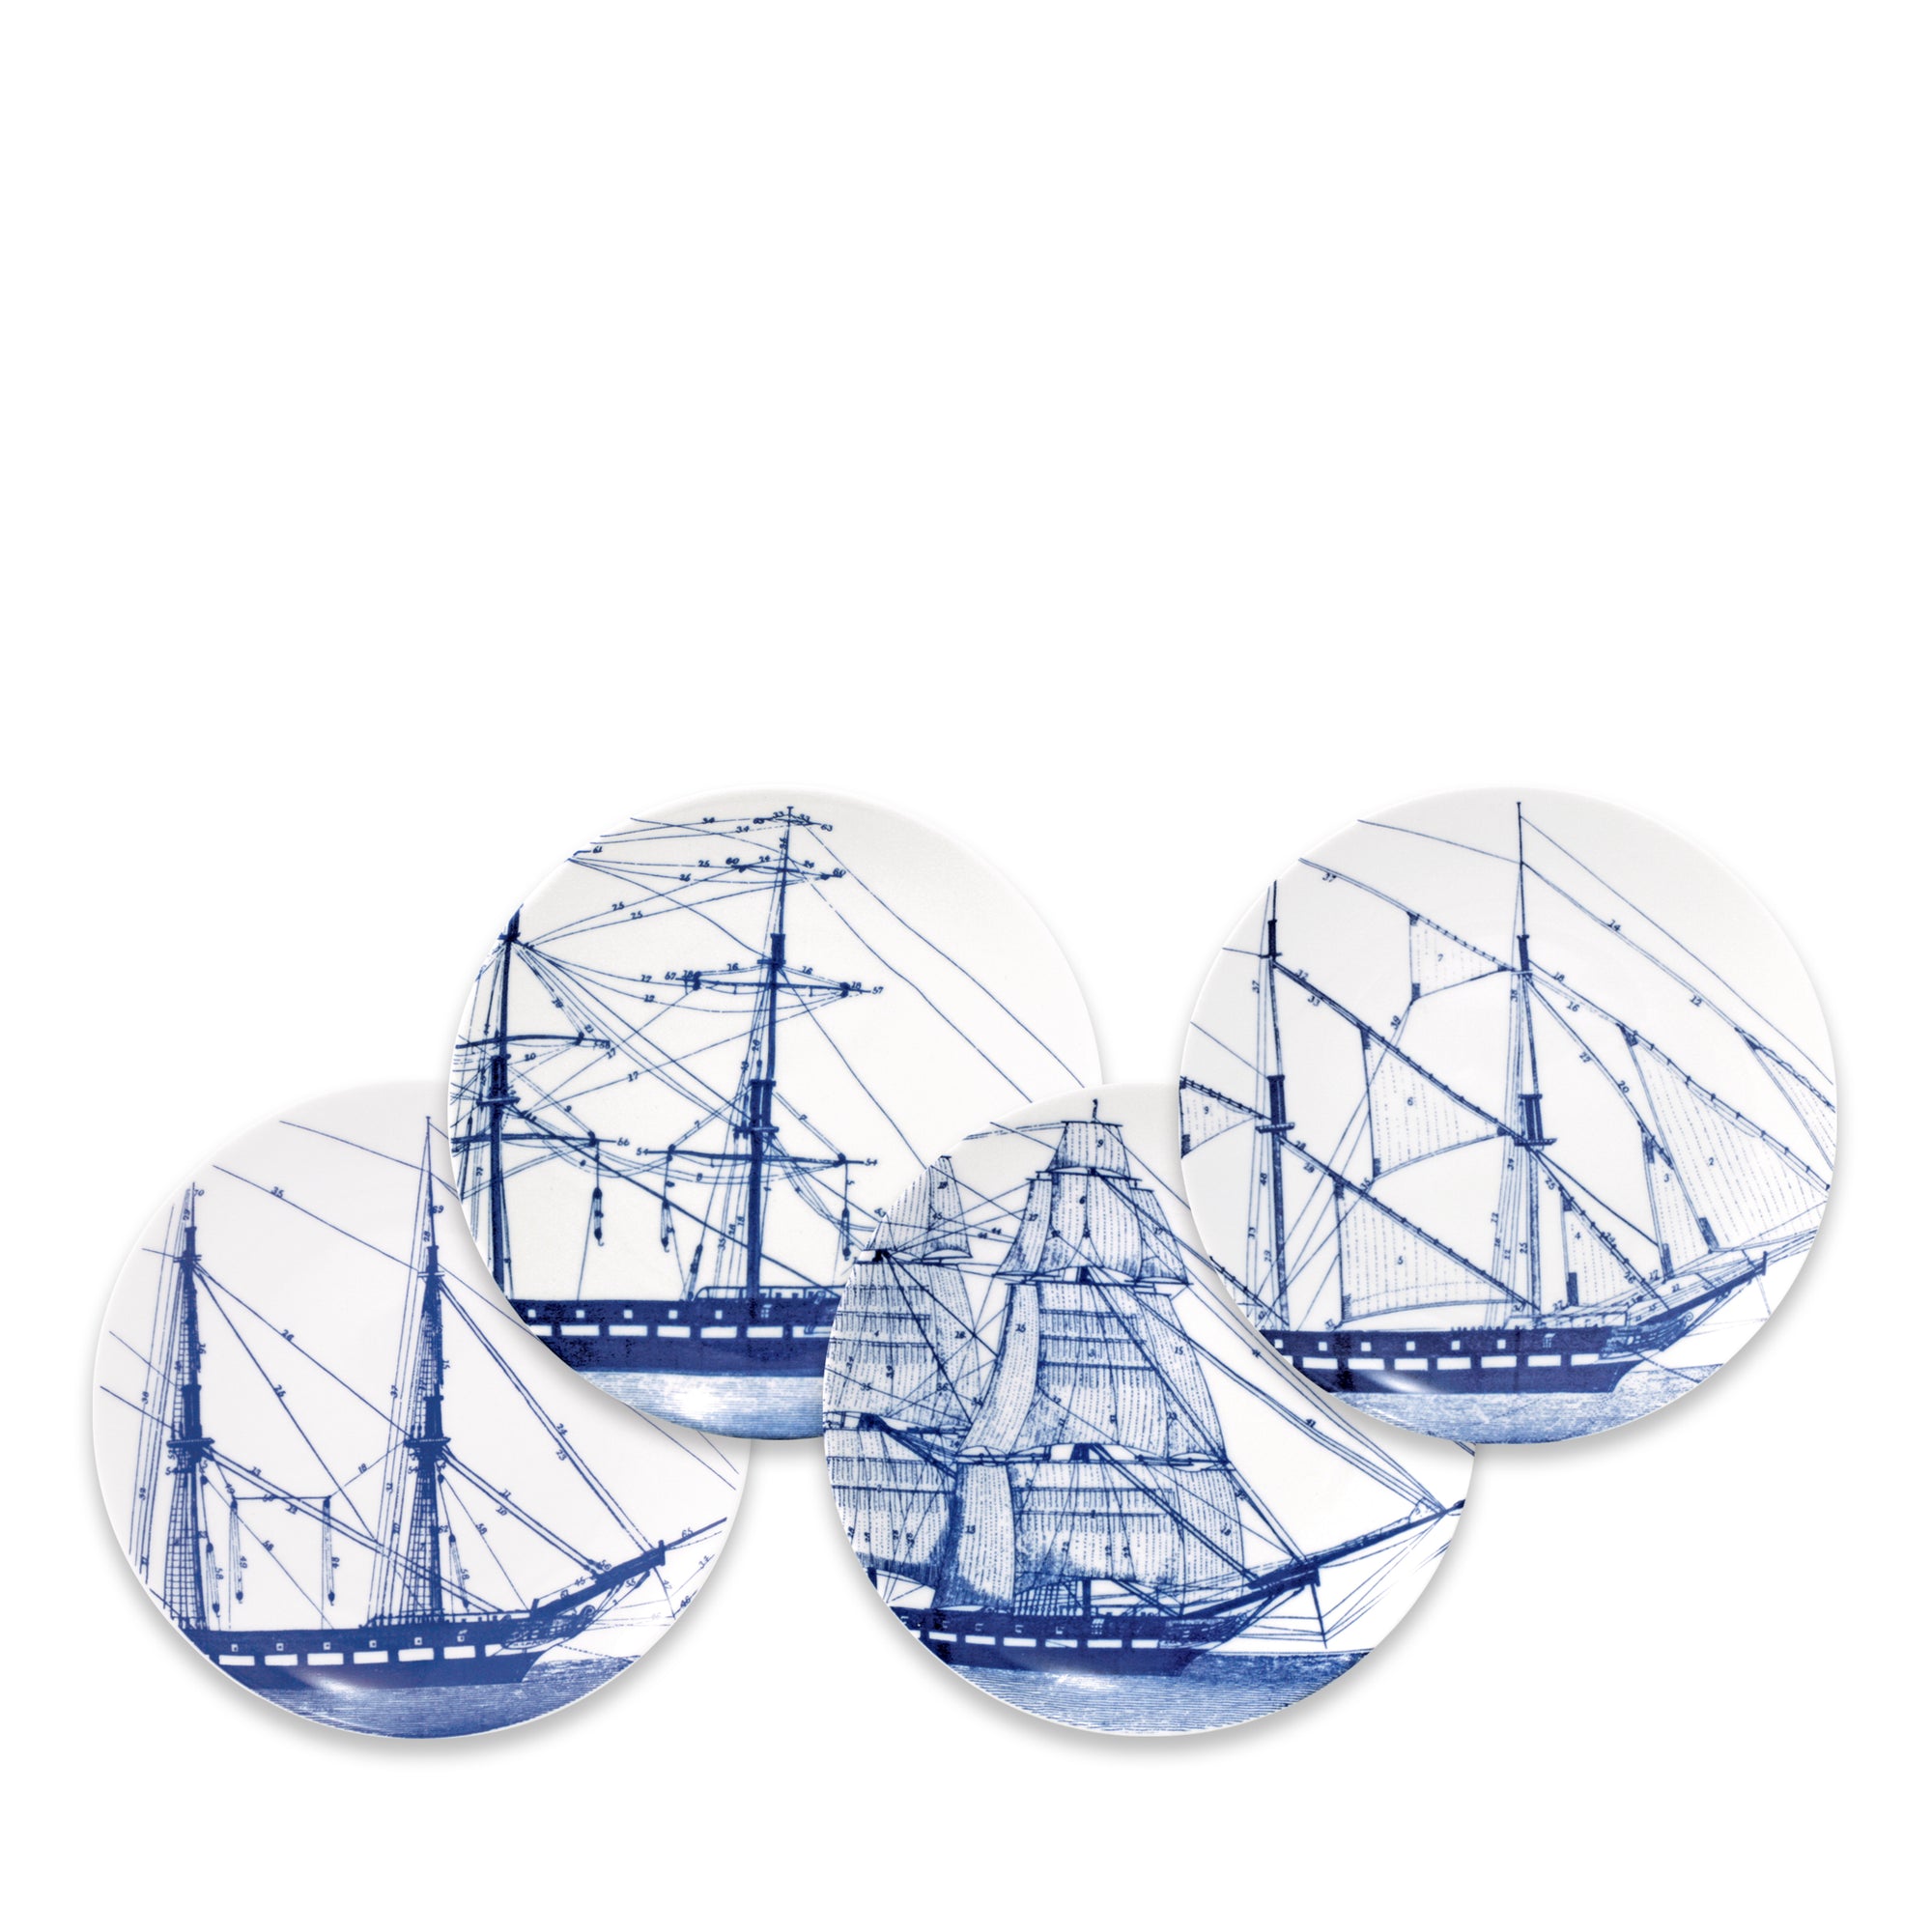 Four Rigging Small Plates from Caskata Artisanal Home featuring a blue and white design of a sailing ship, each piece showcasing vintage illustrations that form a complete image of the vessel, perfect for those who appreciate heirloom-quality dinnerware.